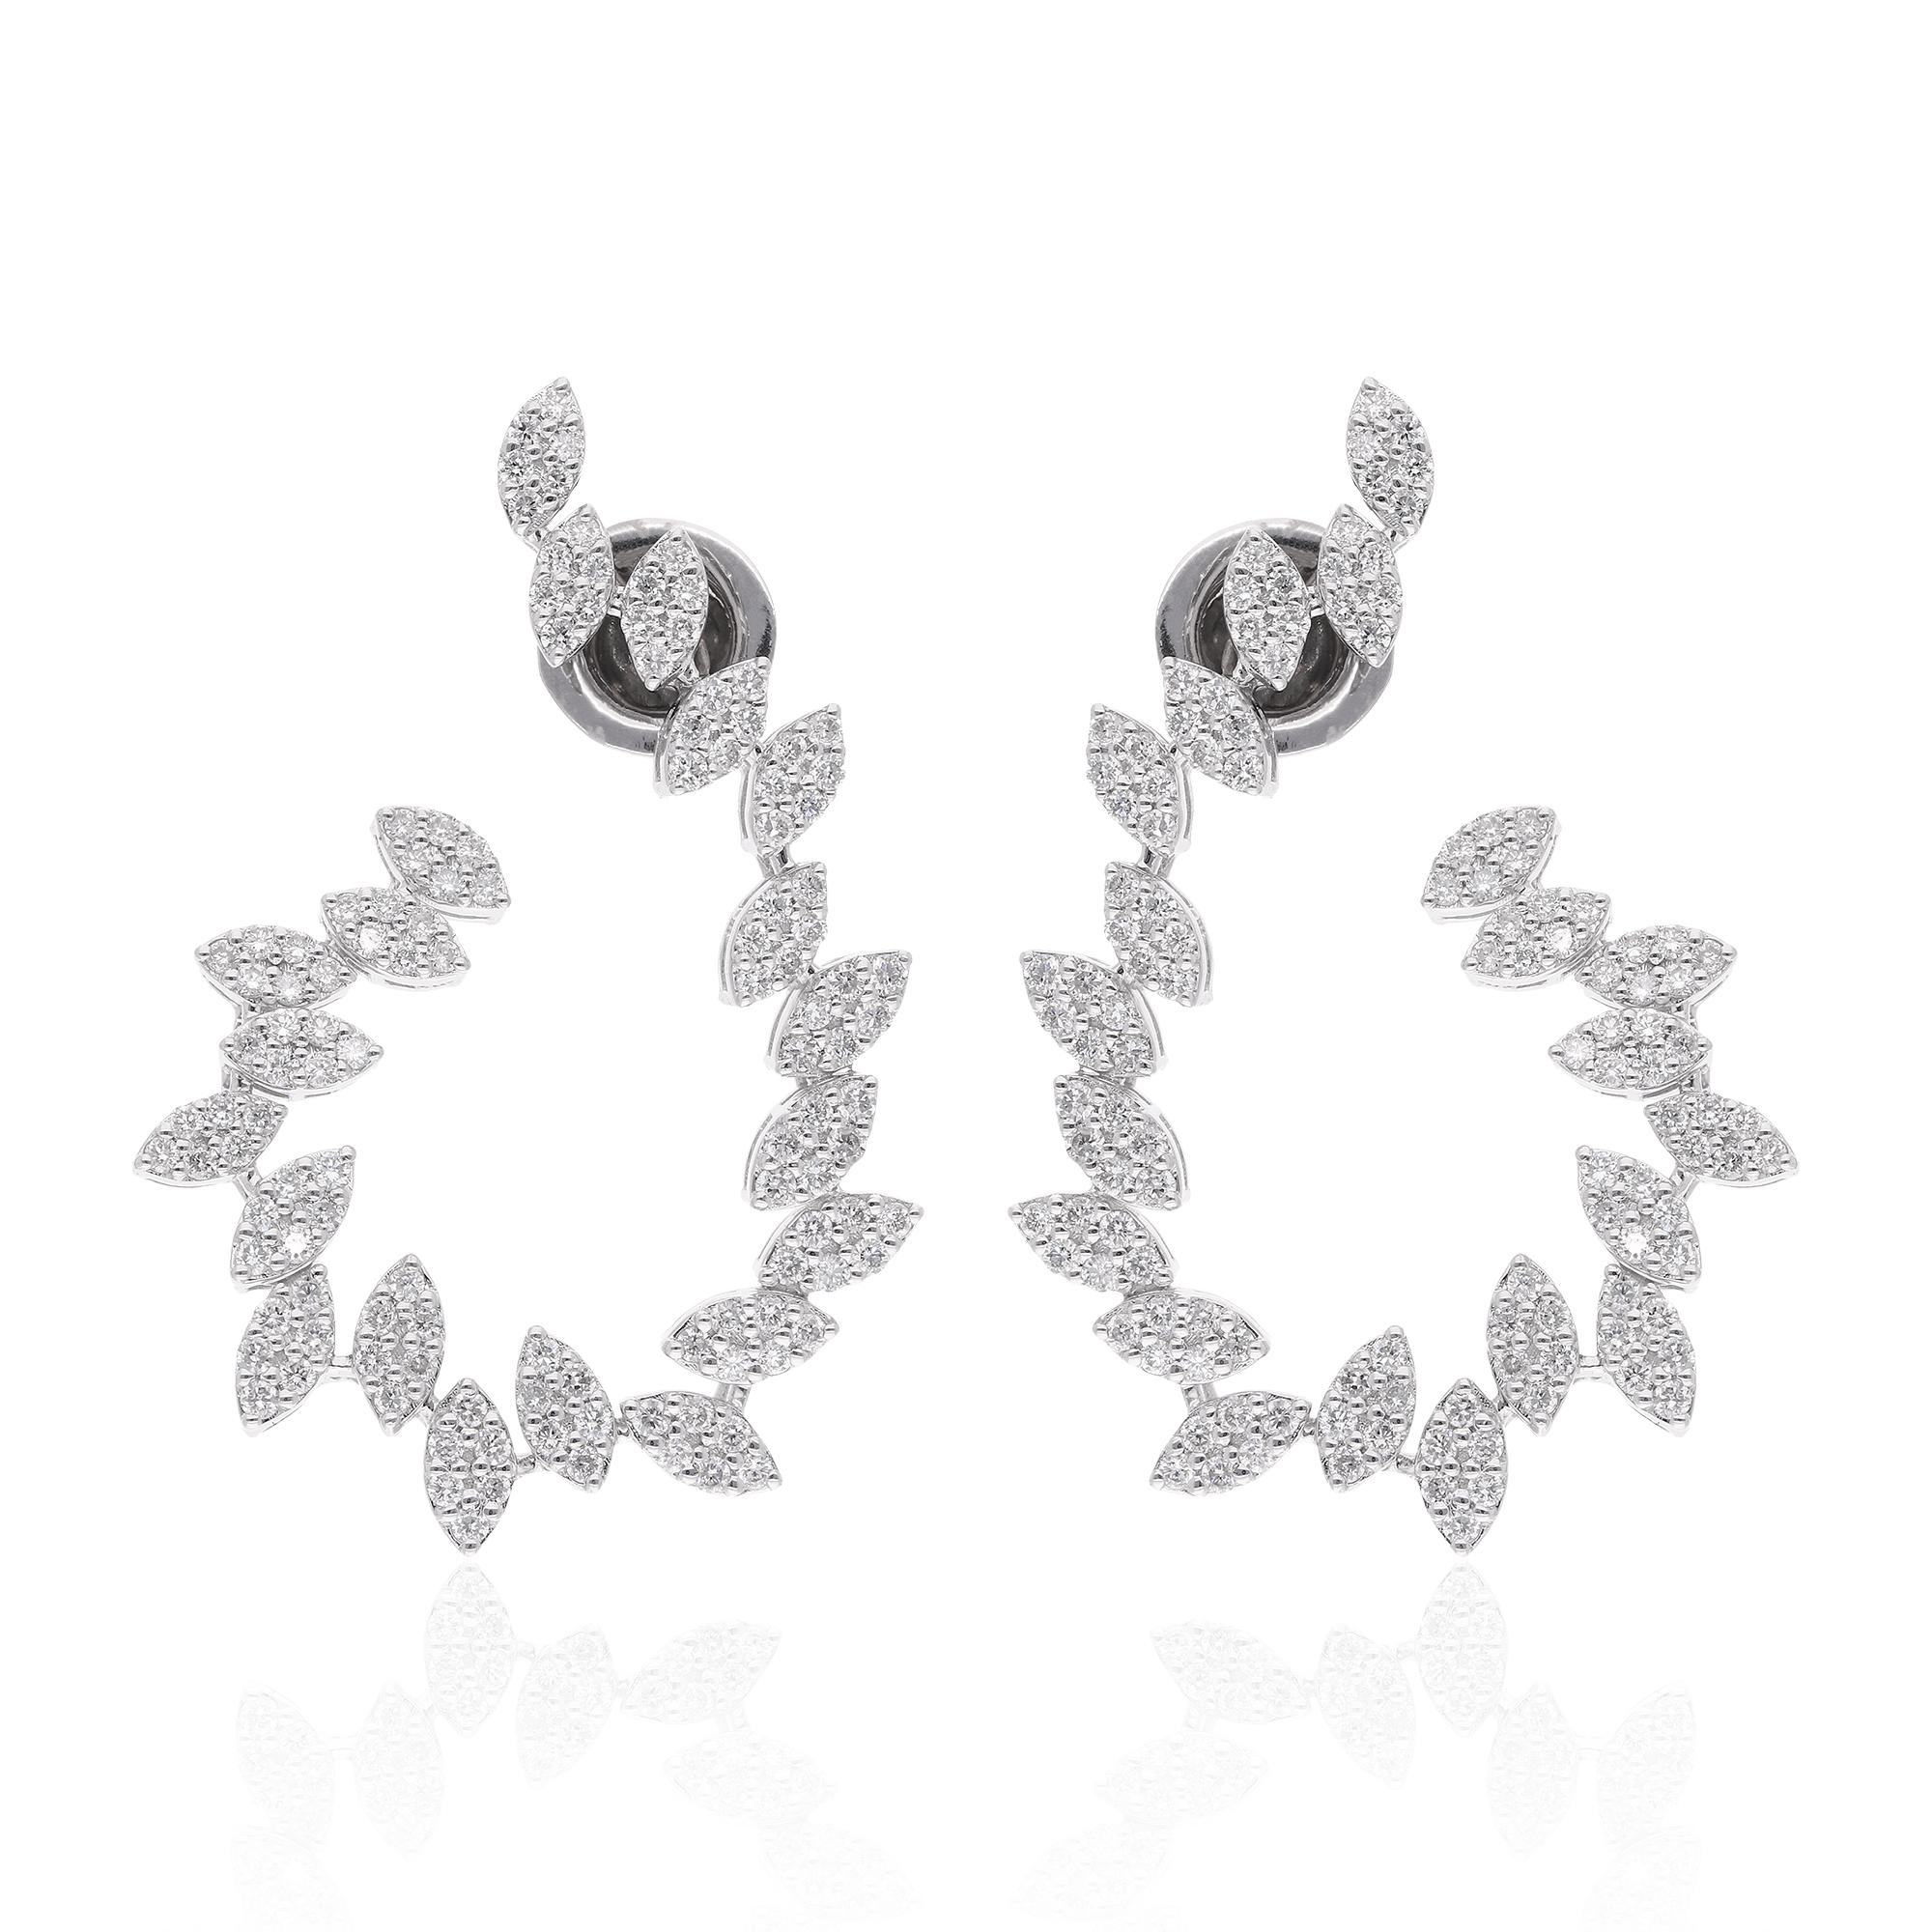 The earrings are crafted in 10 karat white gold, a precious metal that offers durability and a sophisticated look. The white gold setting provides a complementary backdrop for the diamonds, accentuating their beauty and enhancing their natural